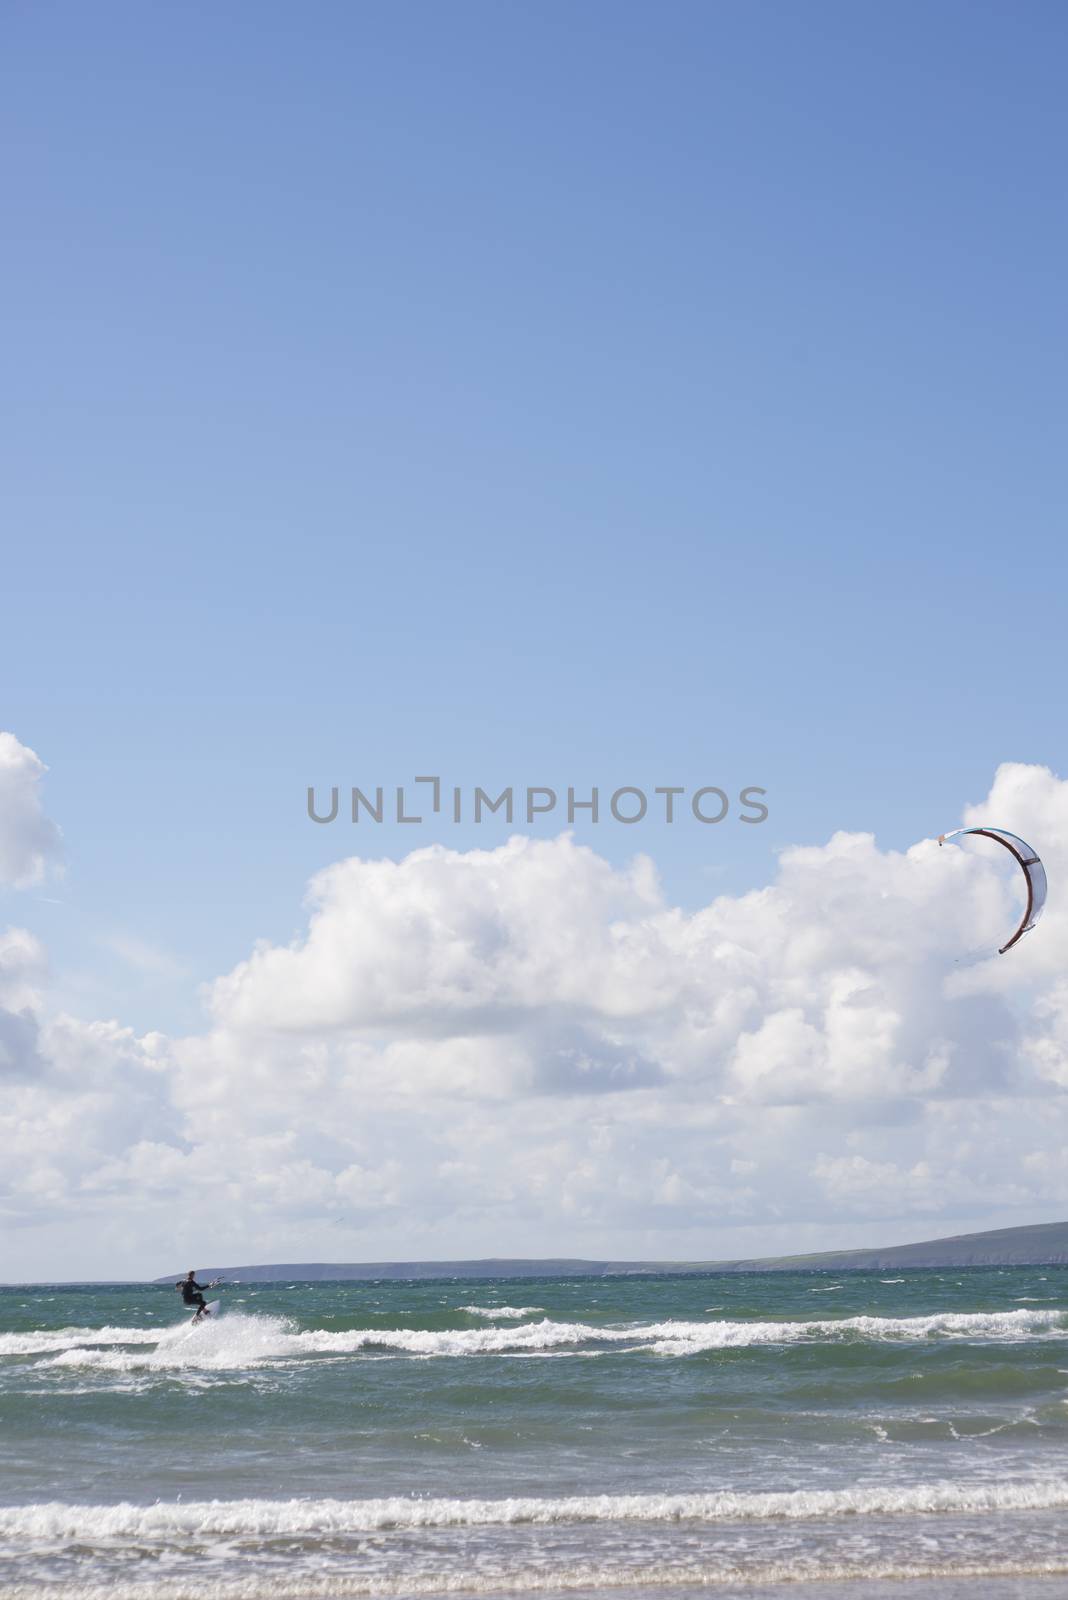 extreme kite surfer on waves by morrbyte